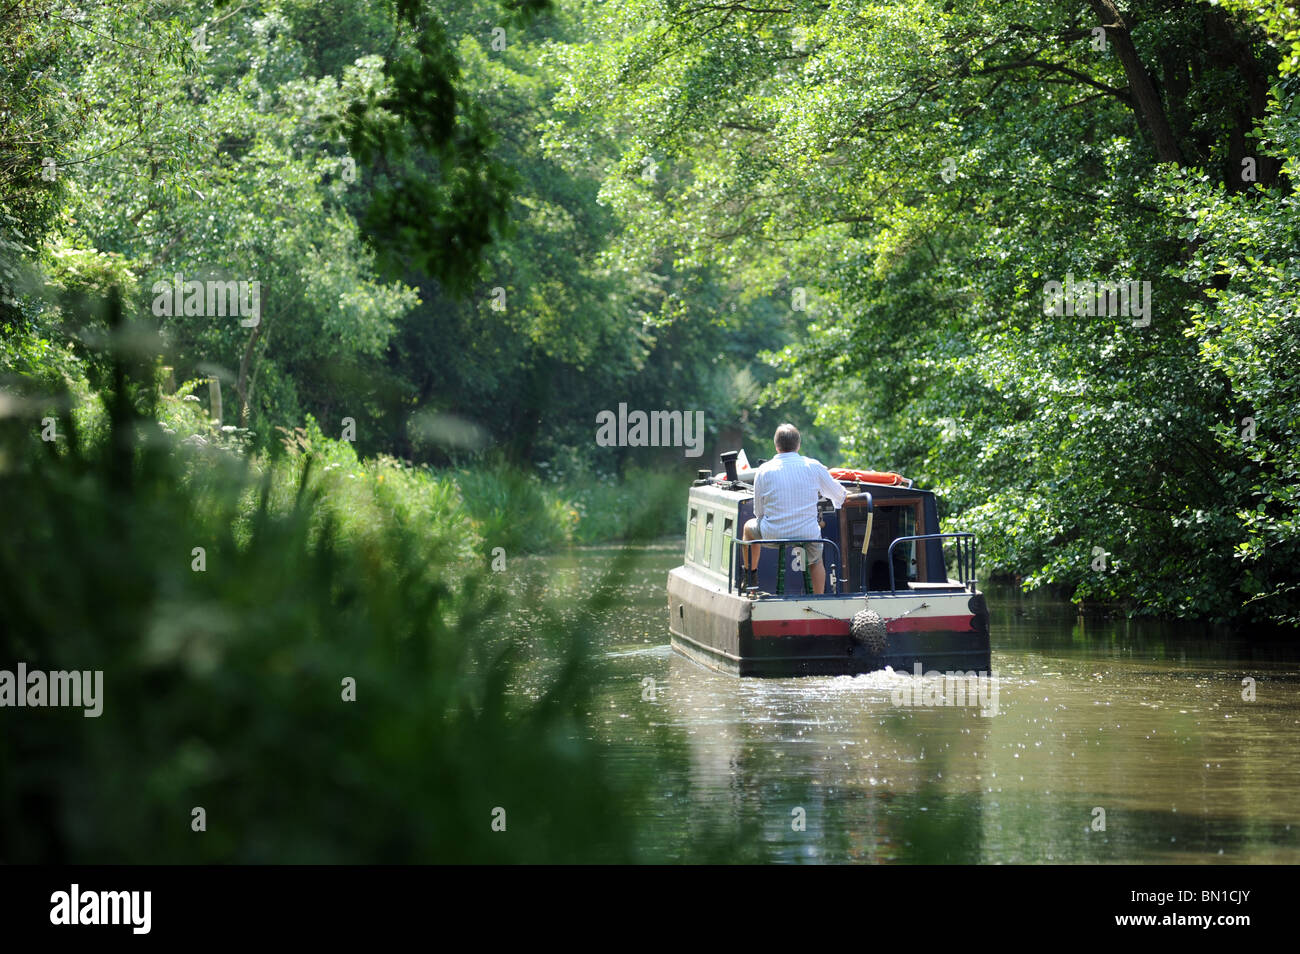 A man steers a narrowboat along a  tranquil  stretch of canal in  Great Britain, re holidays retirement leisure hobbies etc UK Stock Photo